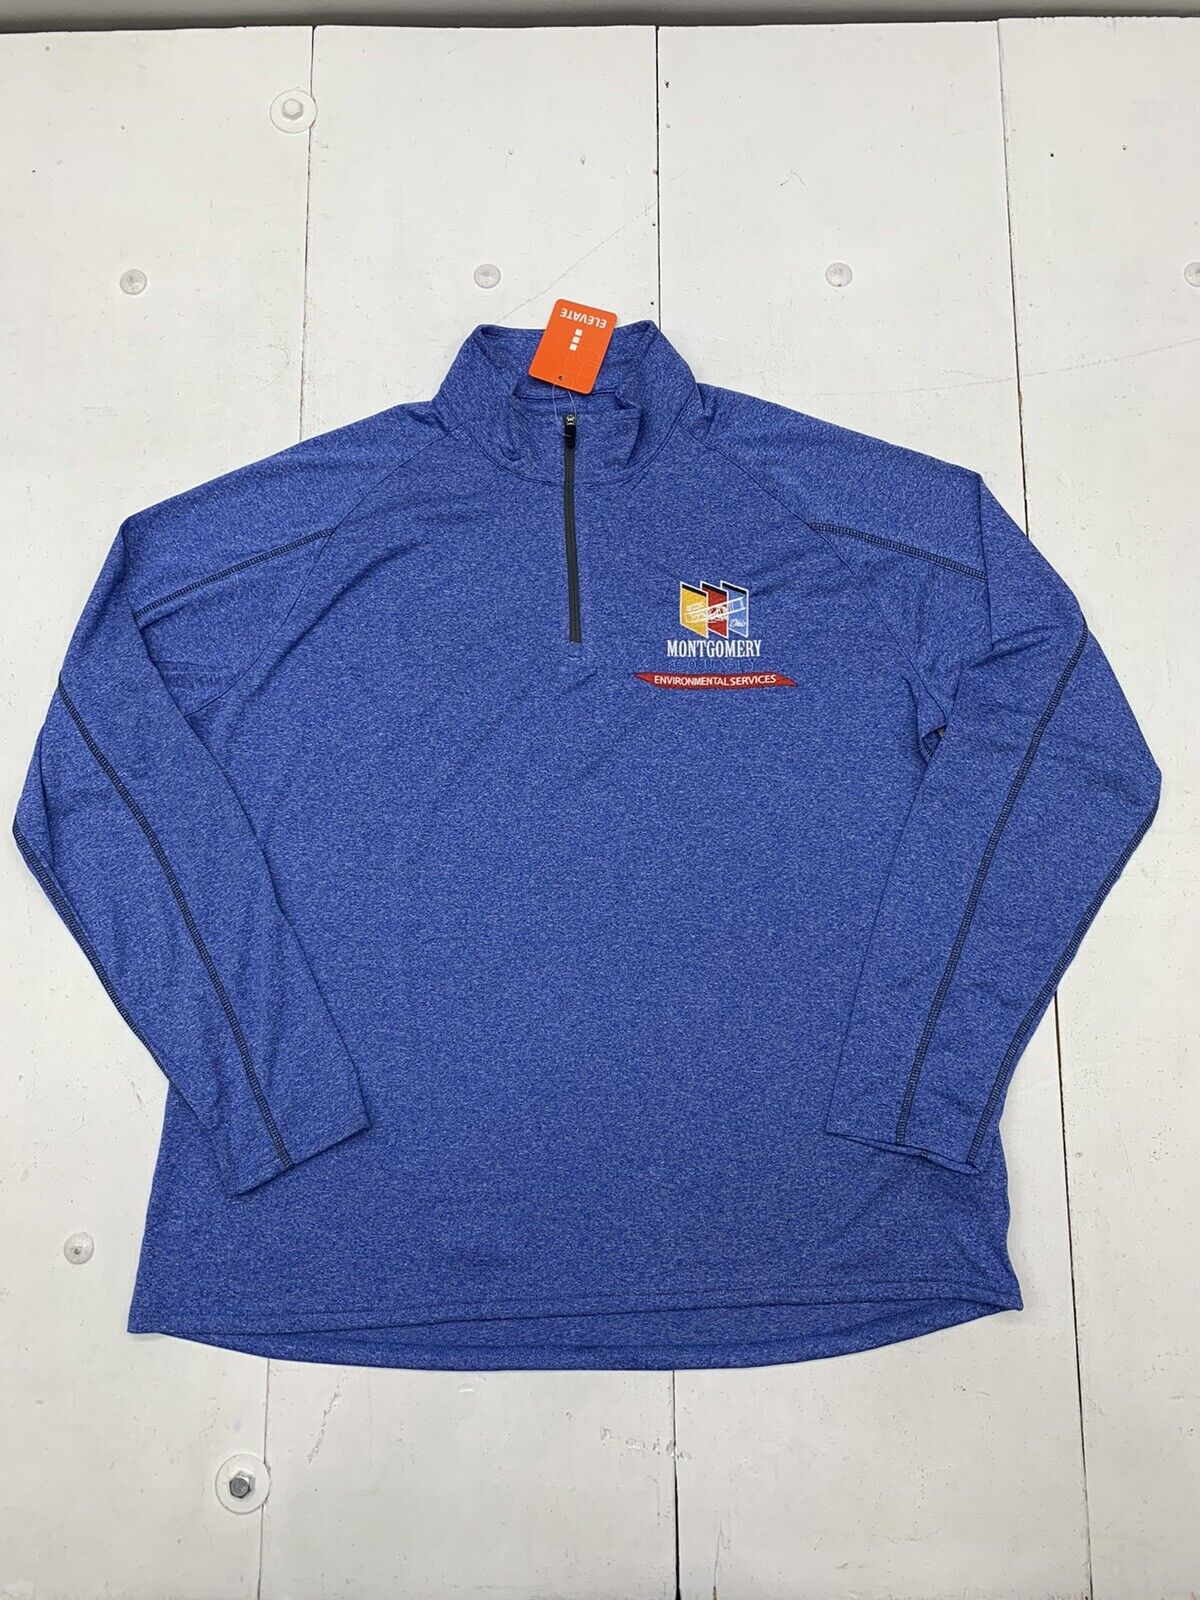 Elevate Womens Blue Embroidered 1/4 Zip Pullover Size 2XL